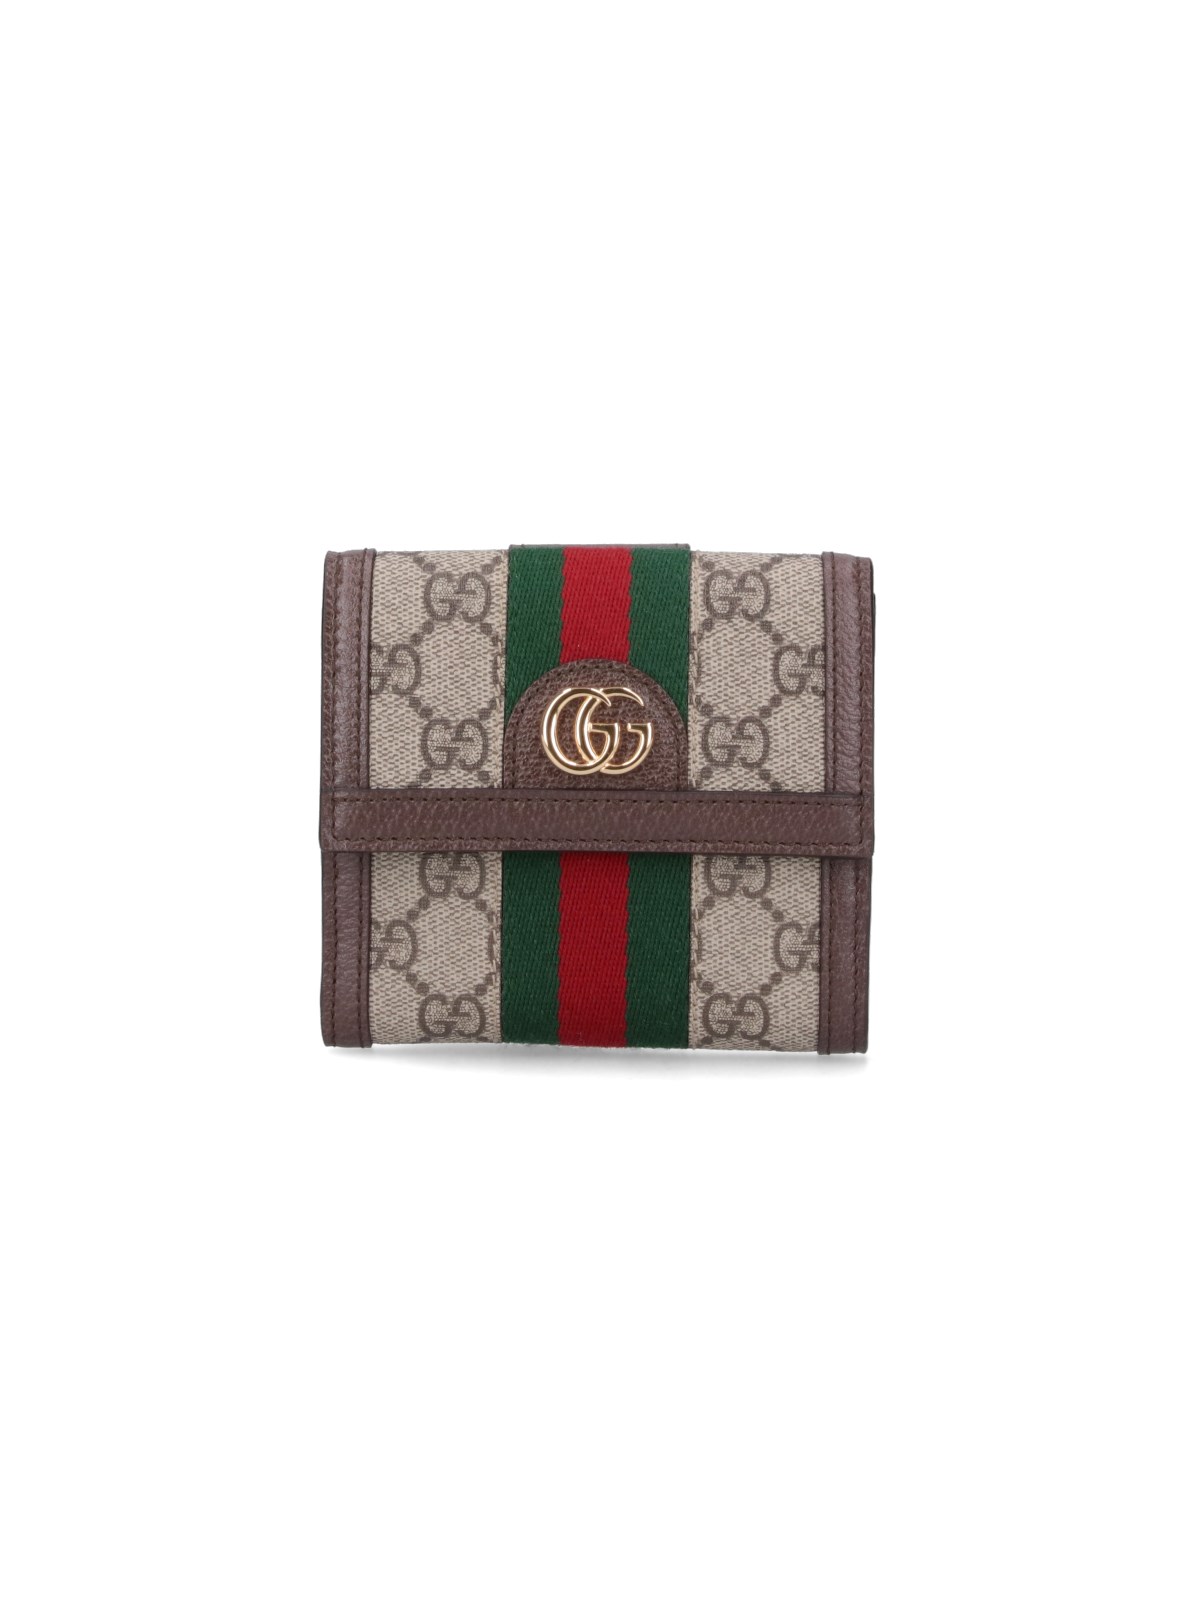 Gucci "ophidia" Wallet In Brown